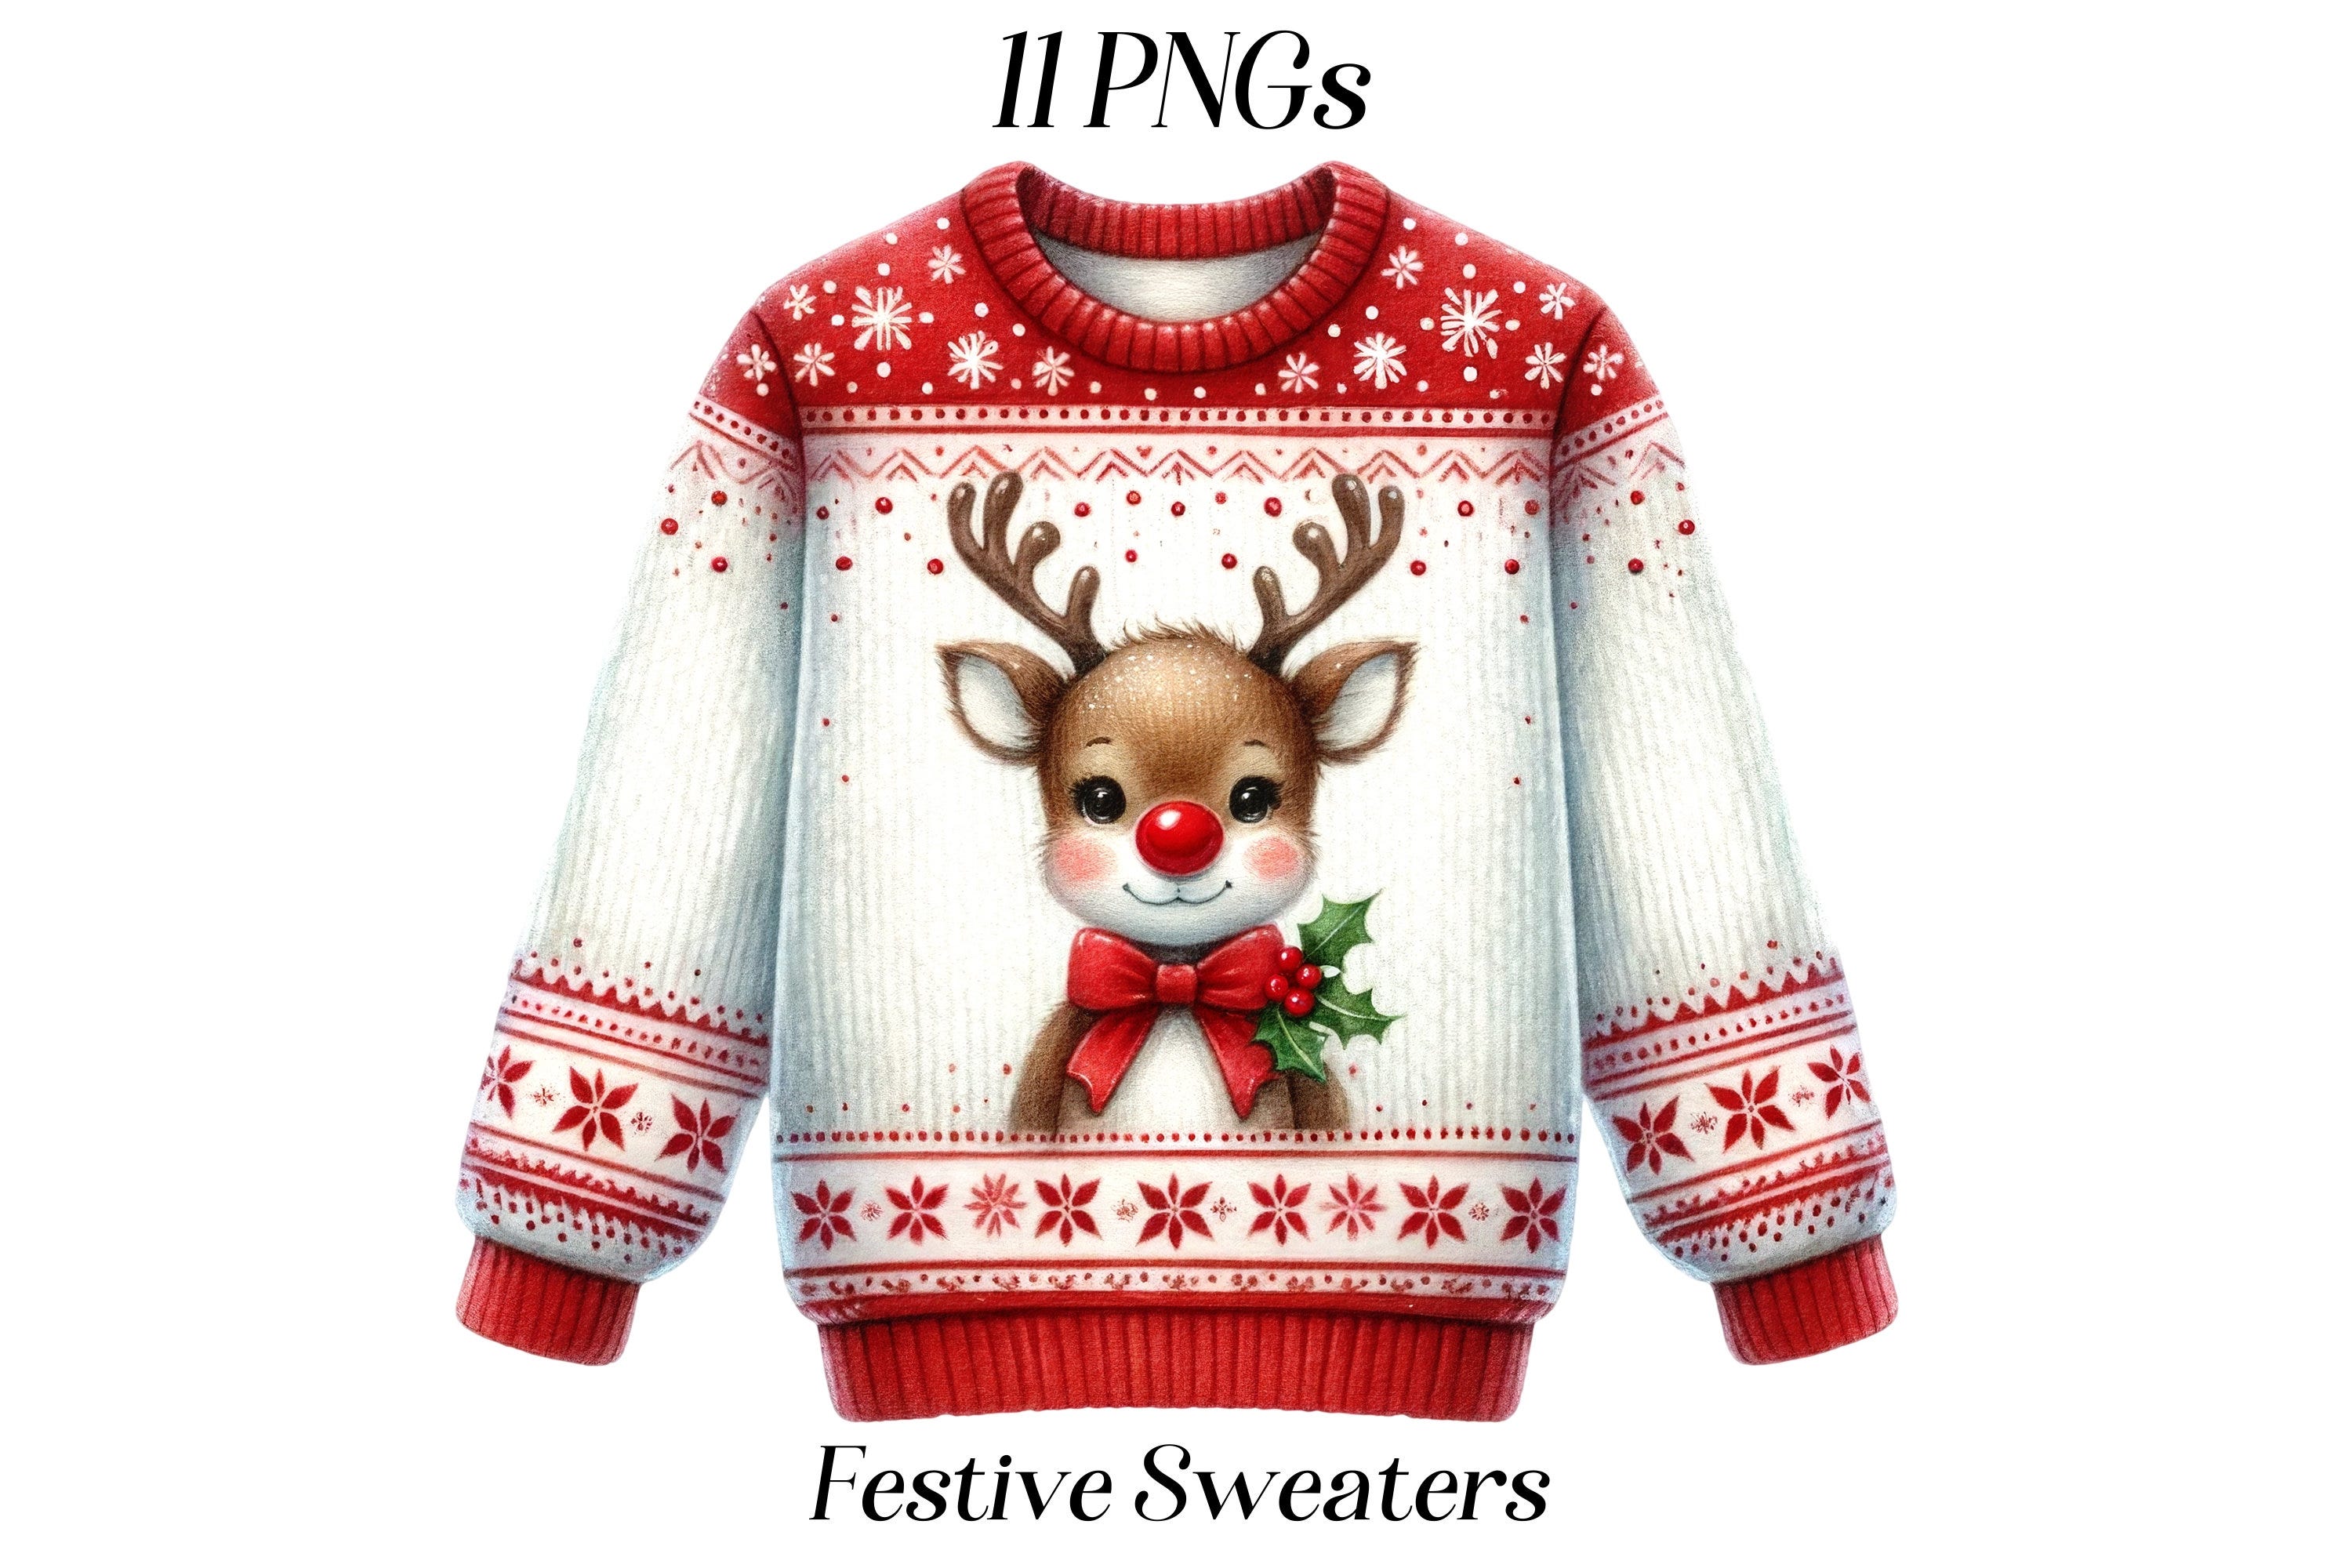 Watercolor Festive Sweaters clipart, 11 high quality PNG files, christmas ugly sweater, christmas jumper, winter holidays, festive clothing